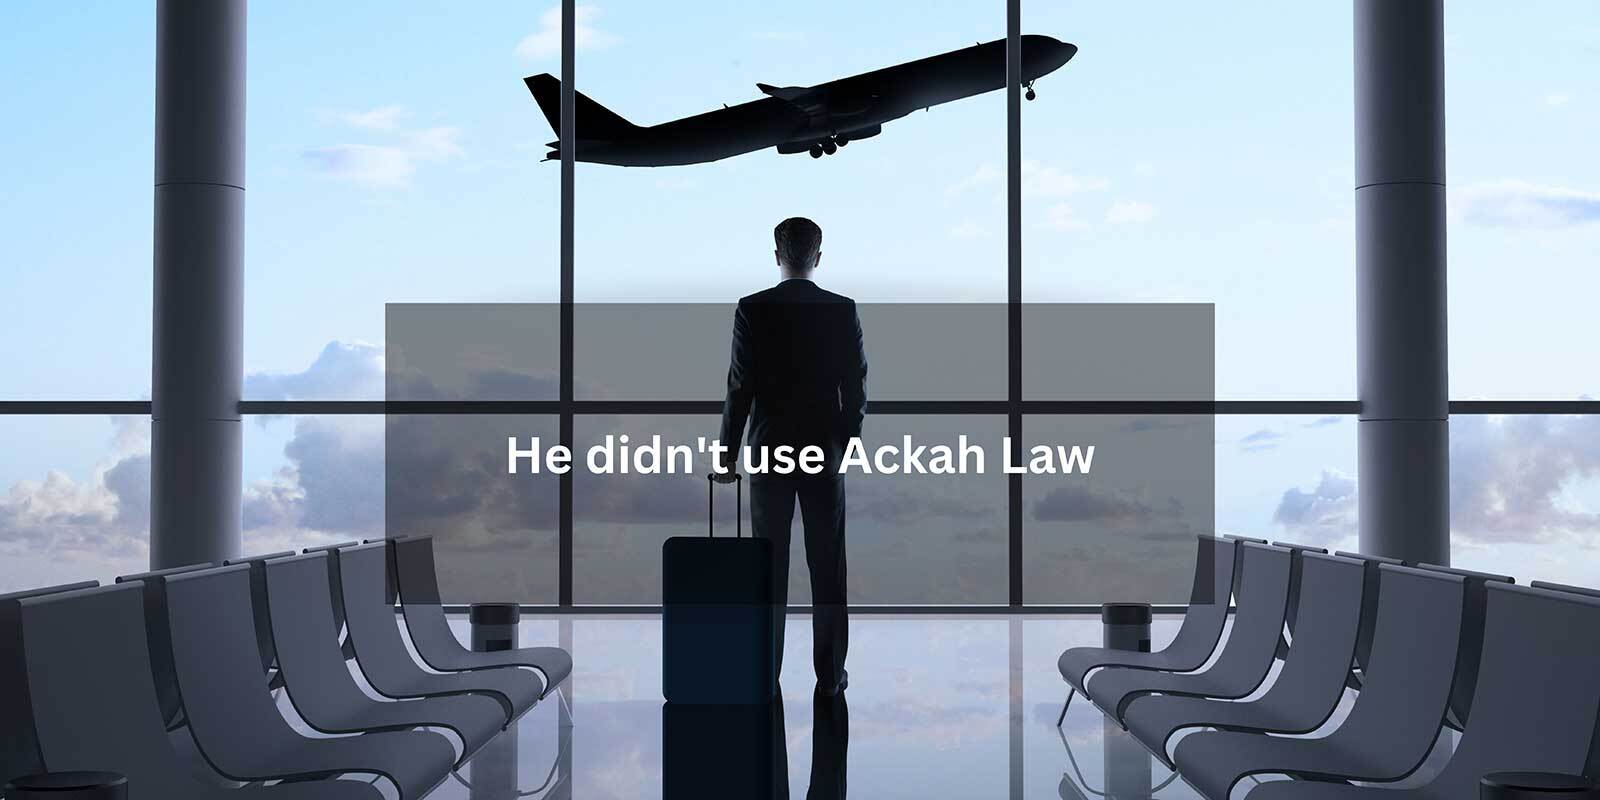 He didn't use Ackah Law